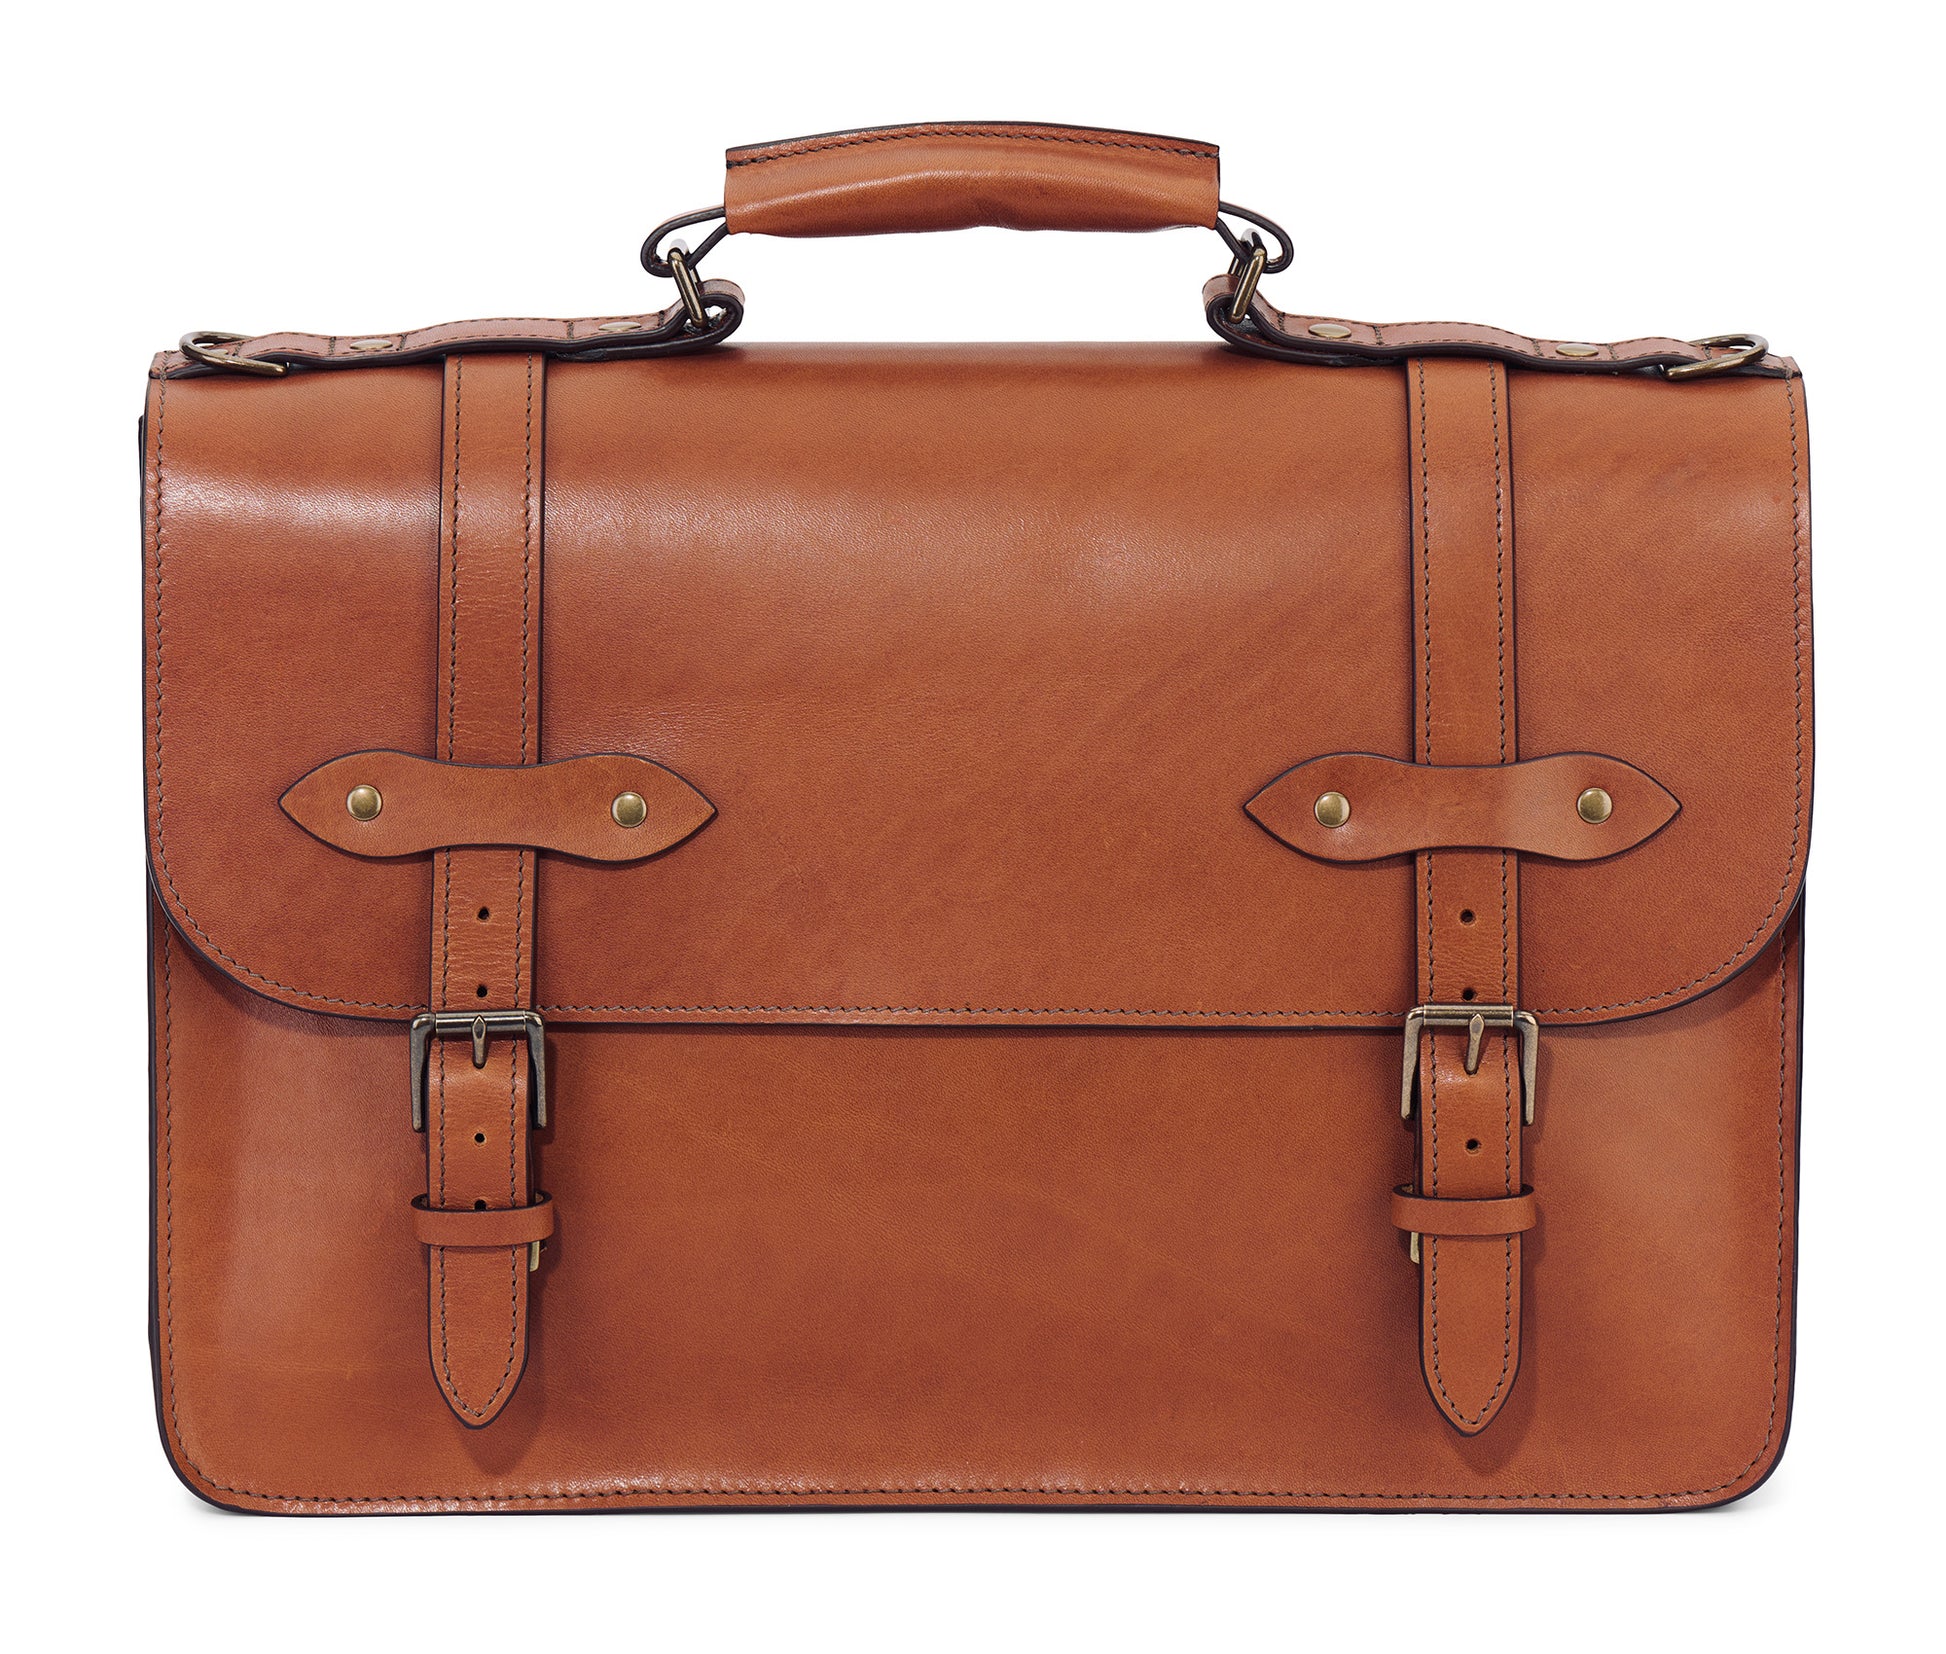 Esq. Briefcase by Jackson Wayne made of full grain leather in saddle tan color front view - lawyer's litigation briefcase